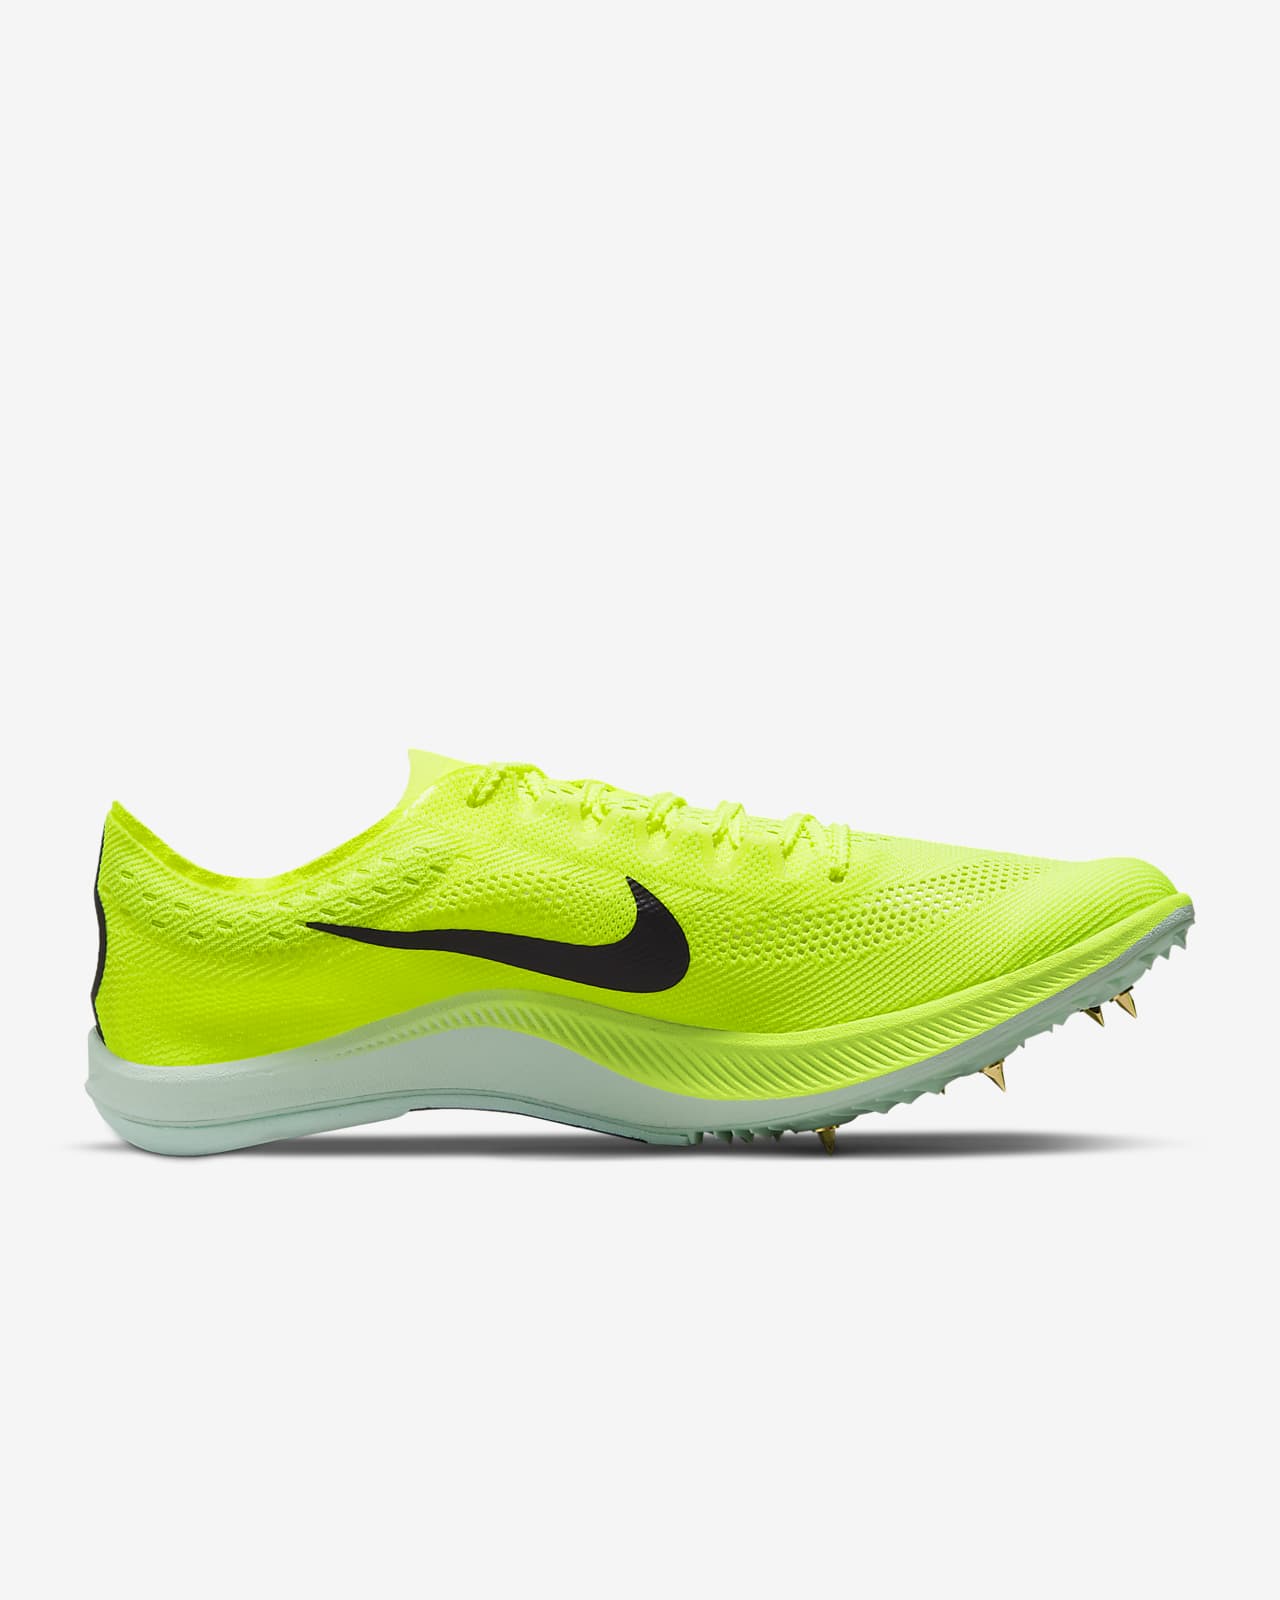 Nike ZoomX Dragonfly atletismo con clavos. Nike ES